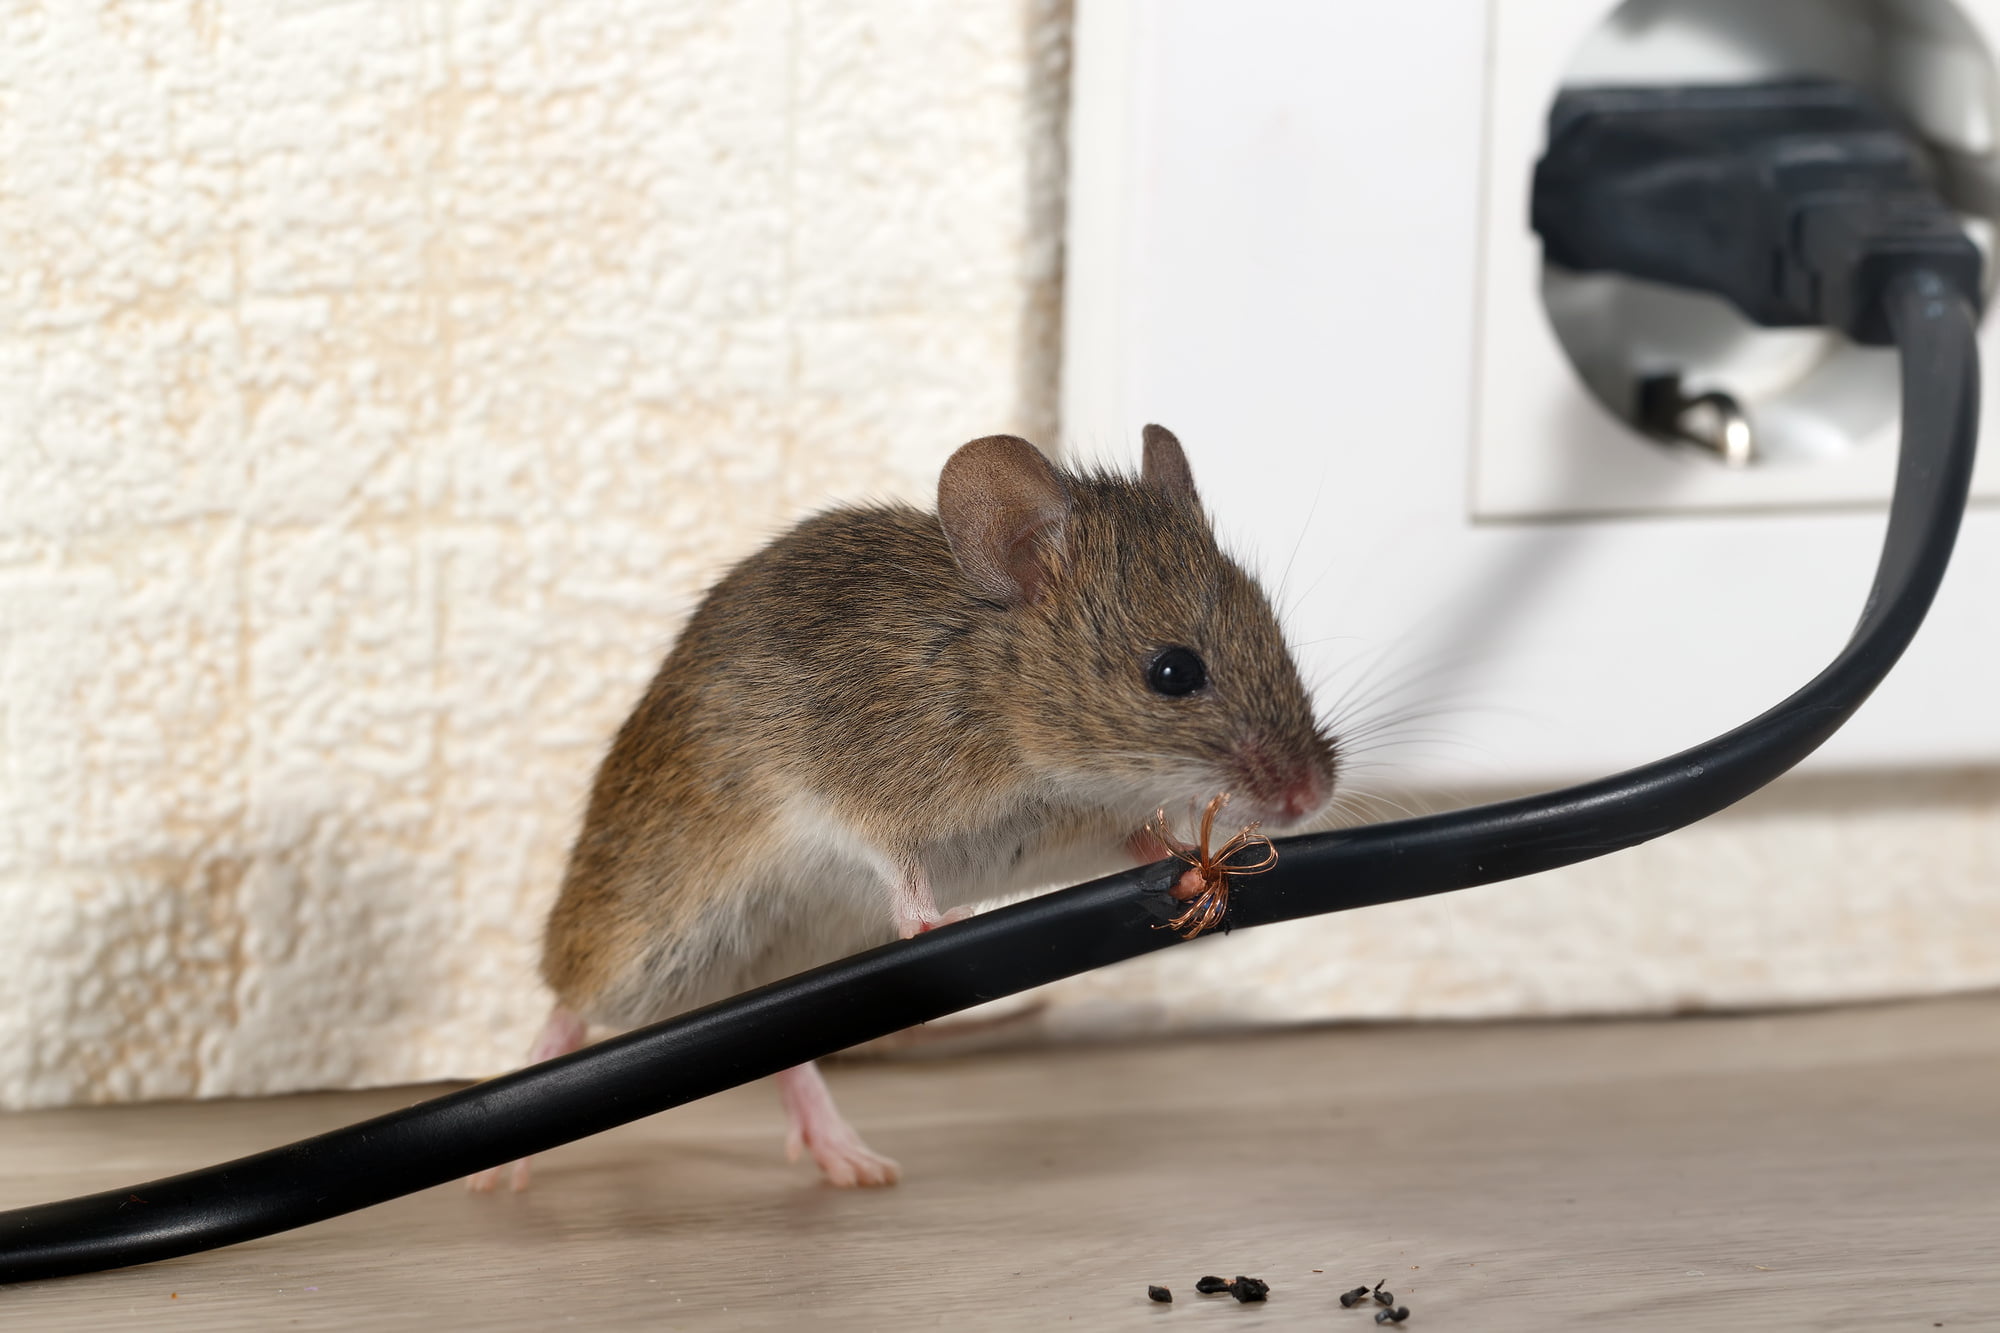 There are several household pests that you need to look out for. Keep reading to learn more about spotting and removing these pests.